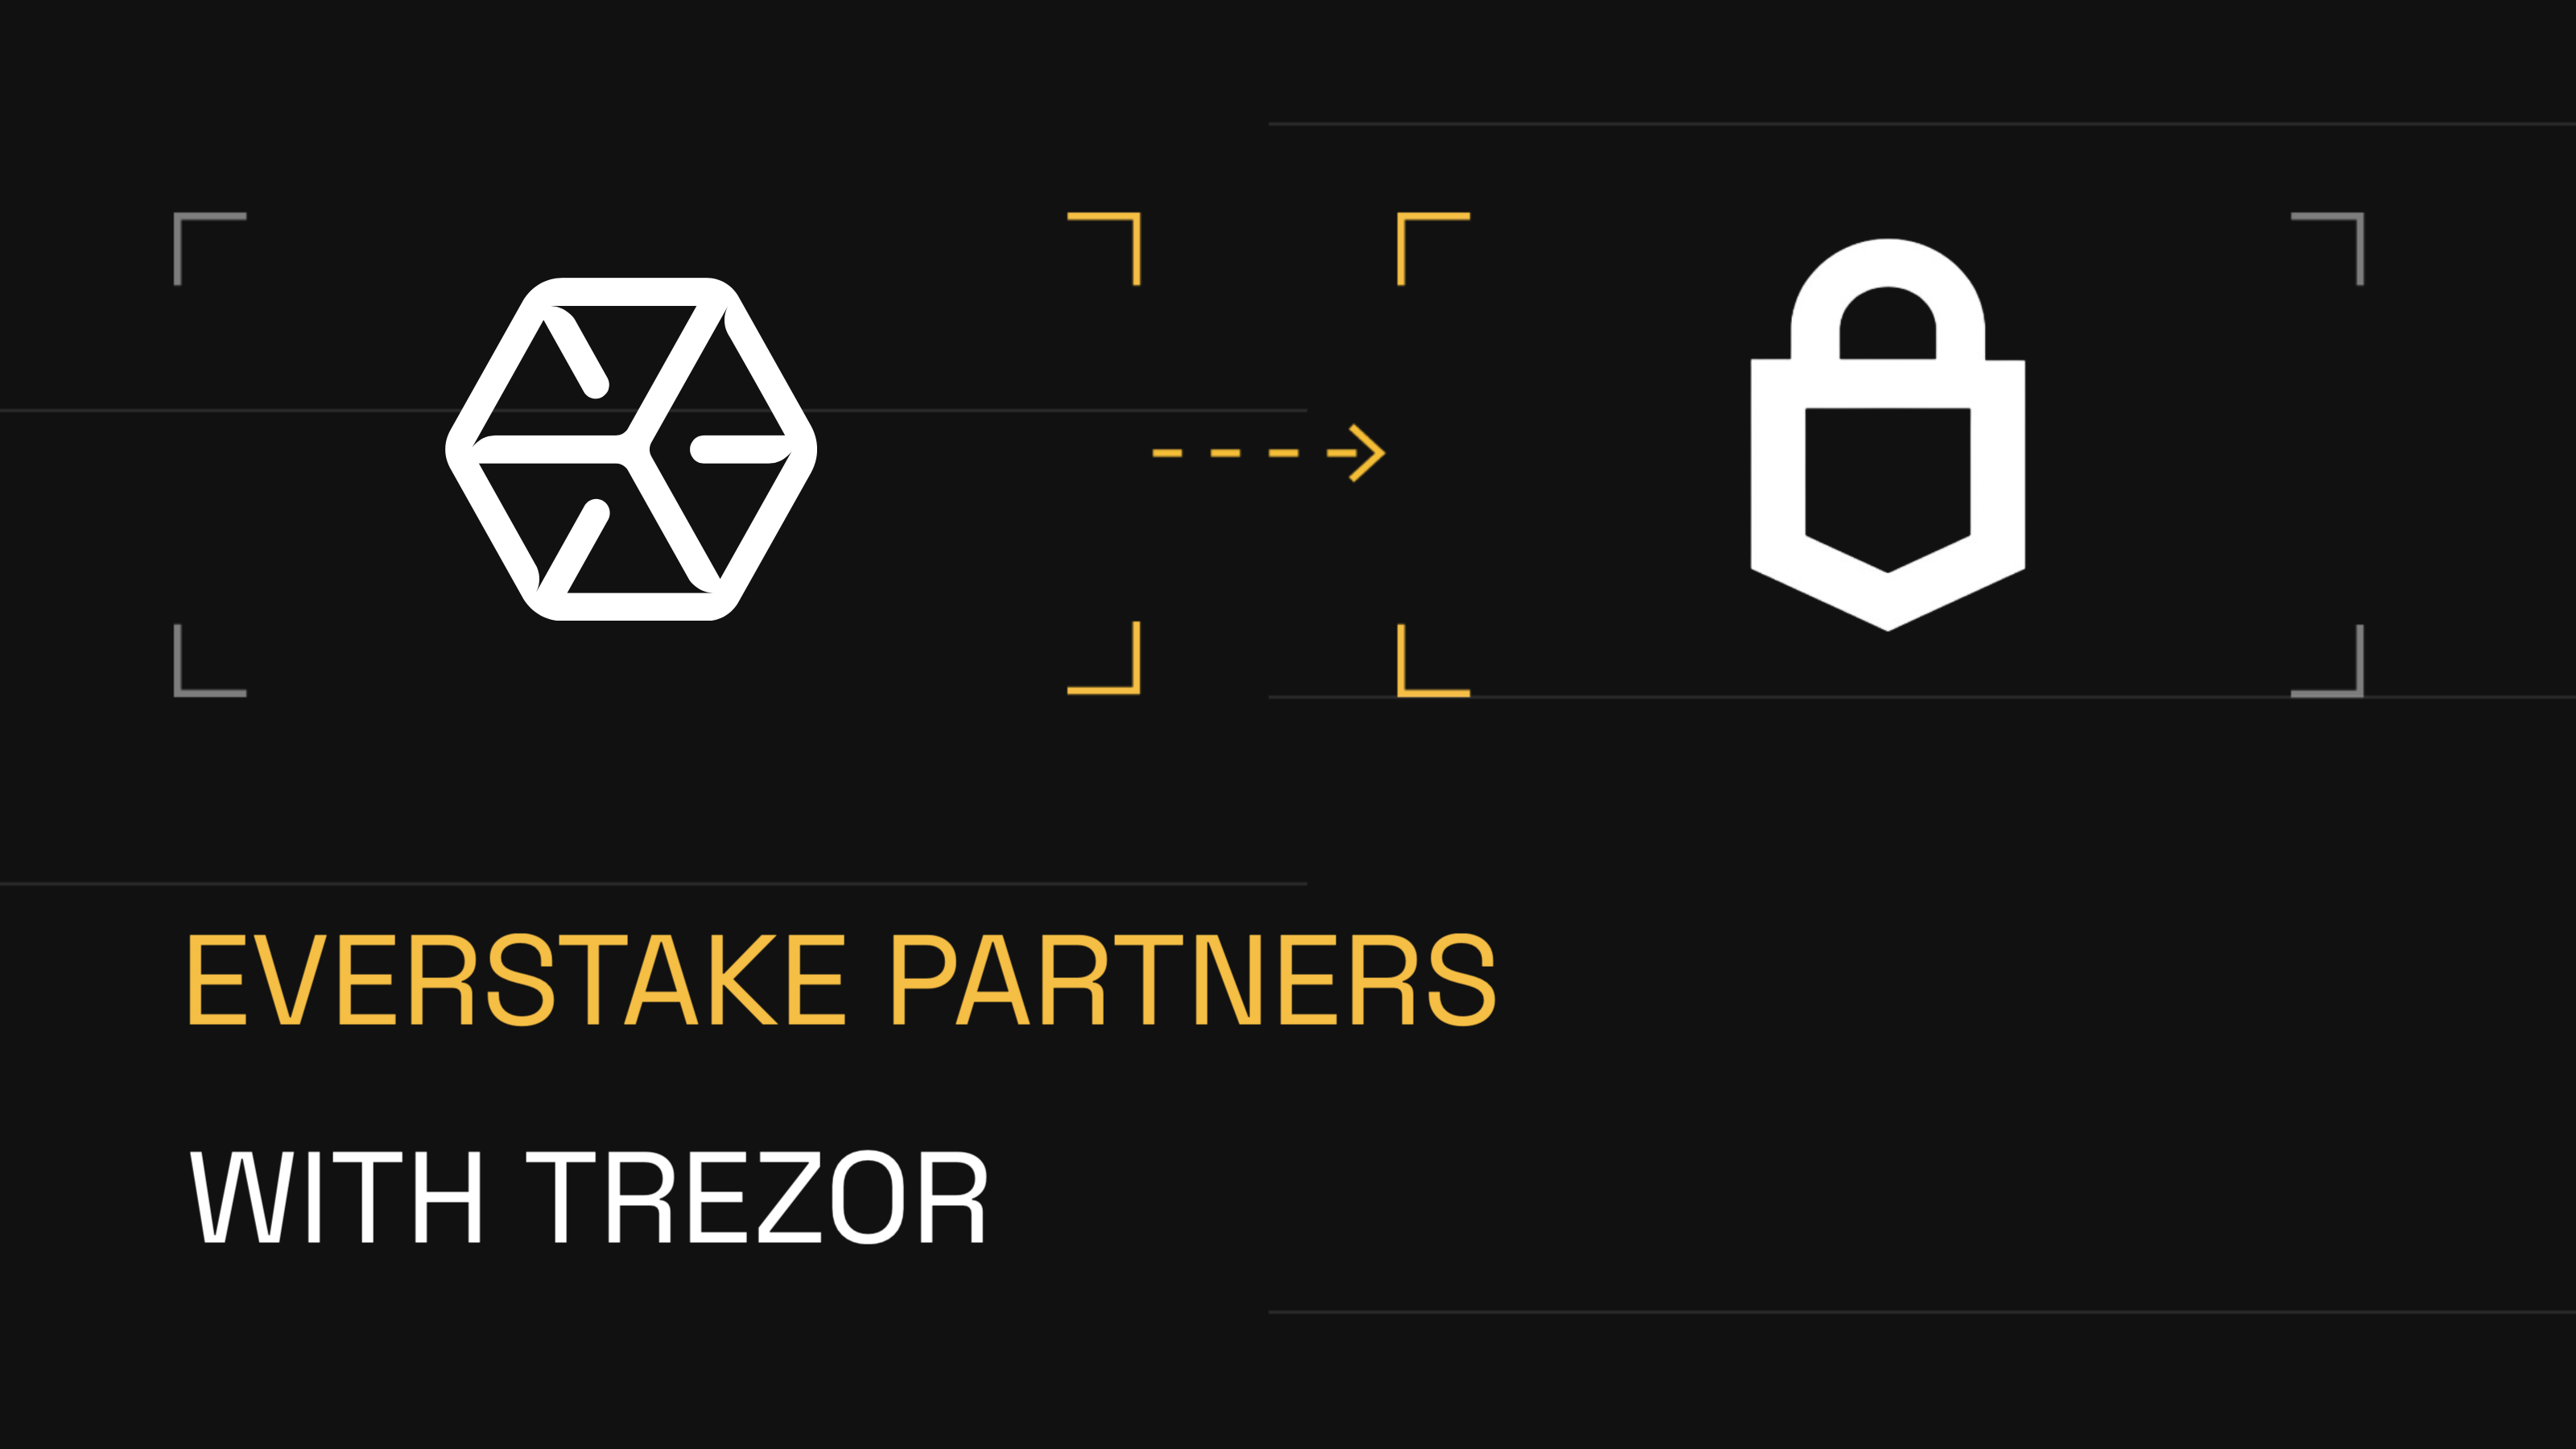 Everstake Partners with Trezor to Set up a New Level of Staking Experience